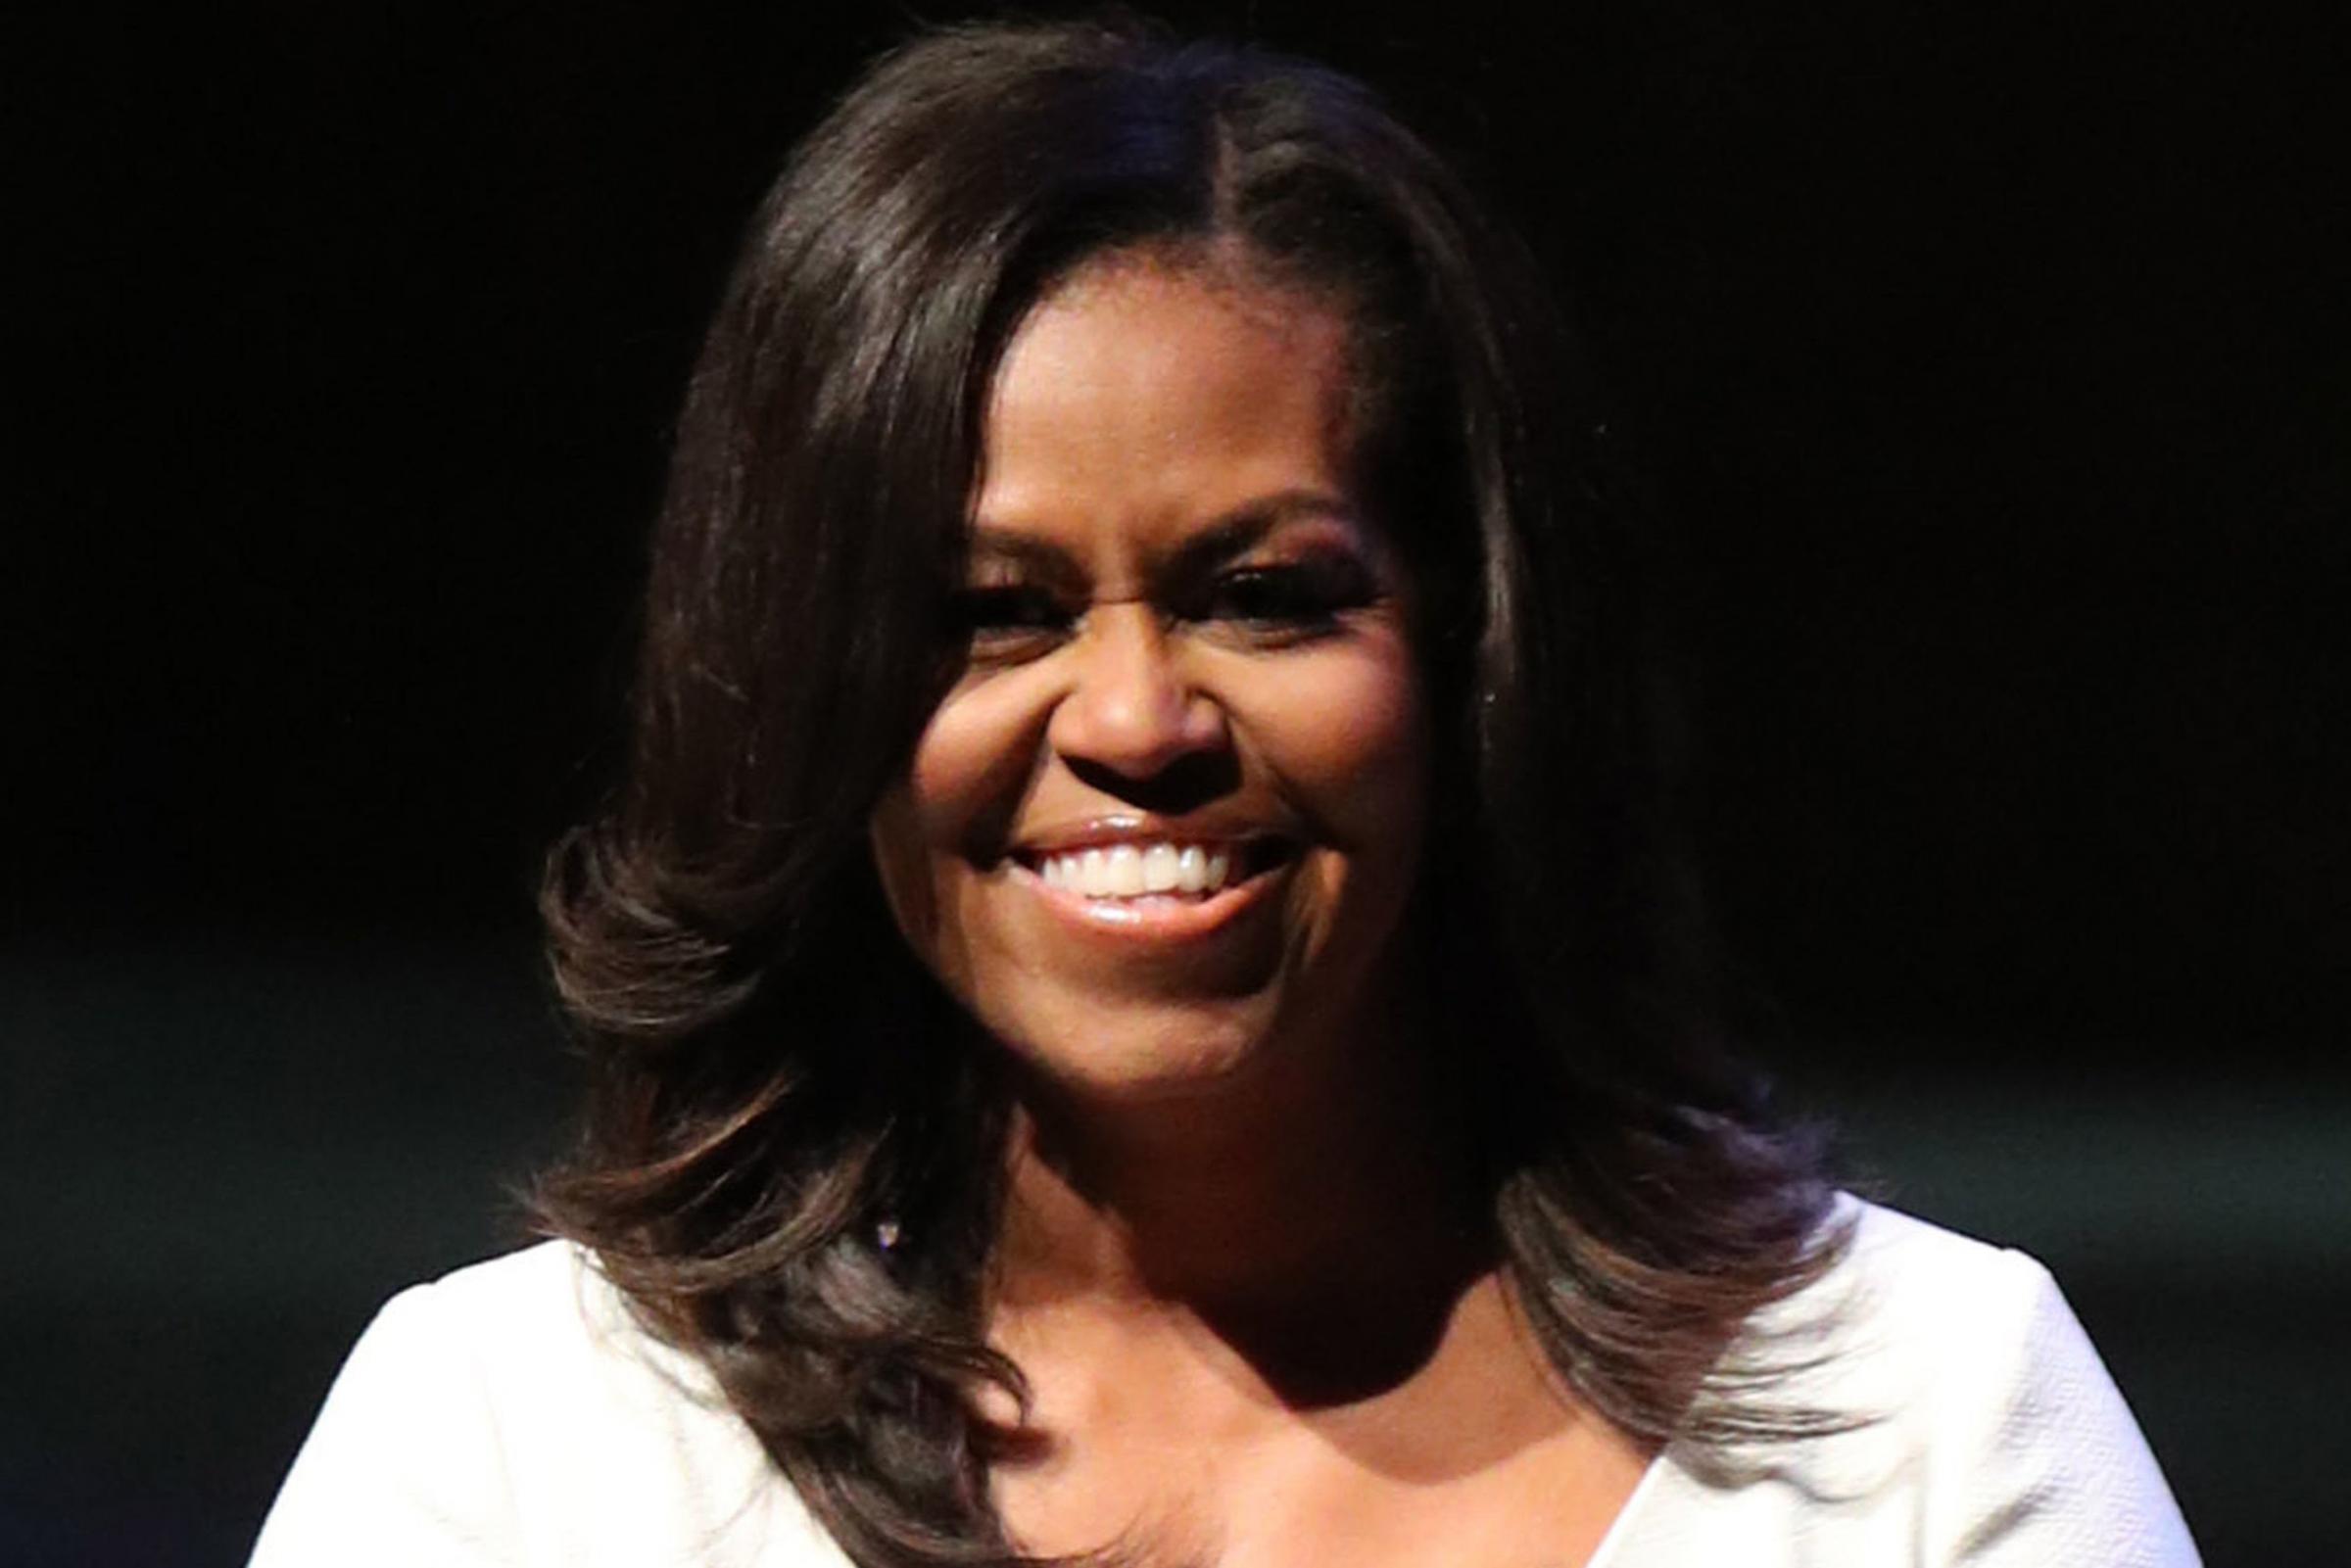 Michelle Obama's book tour is coming to Greenwich in 2019